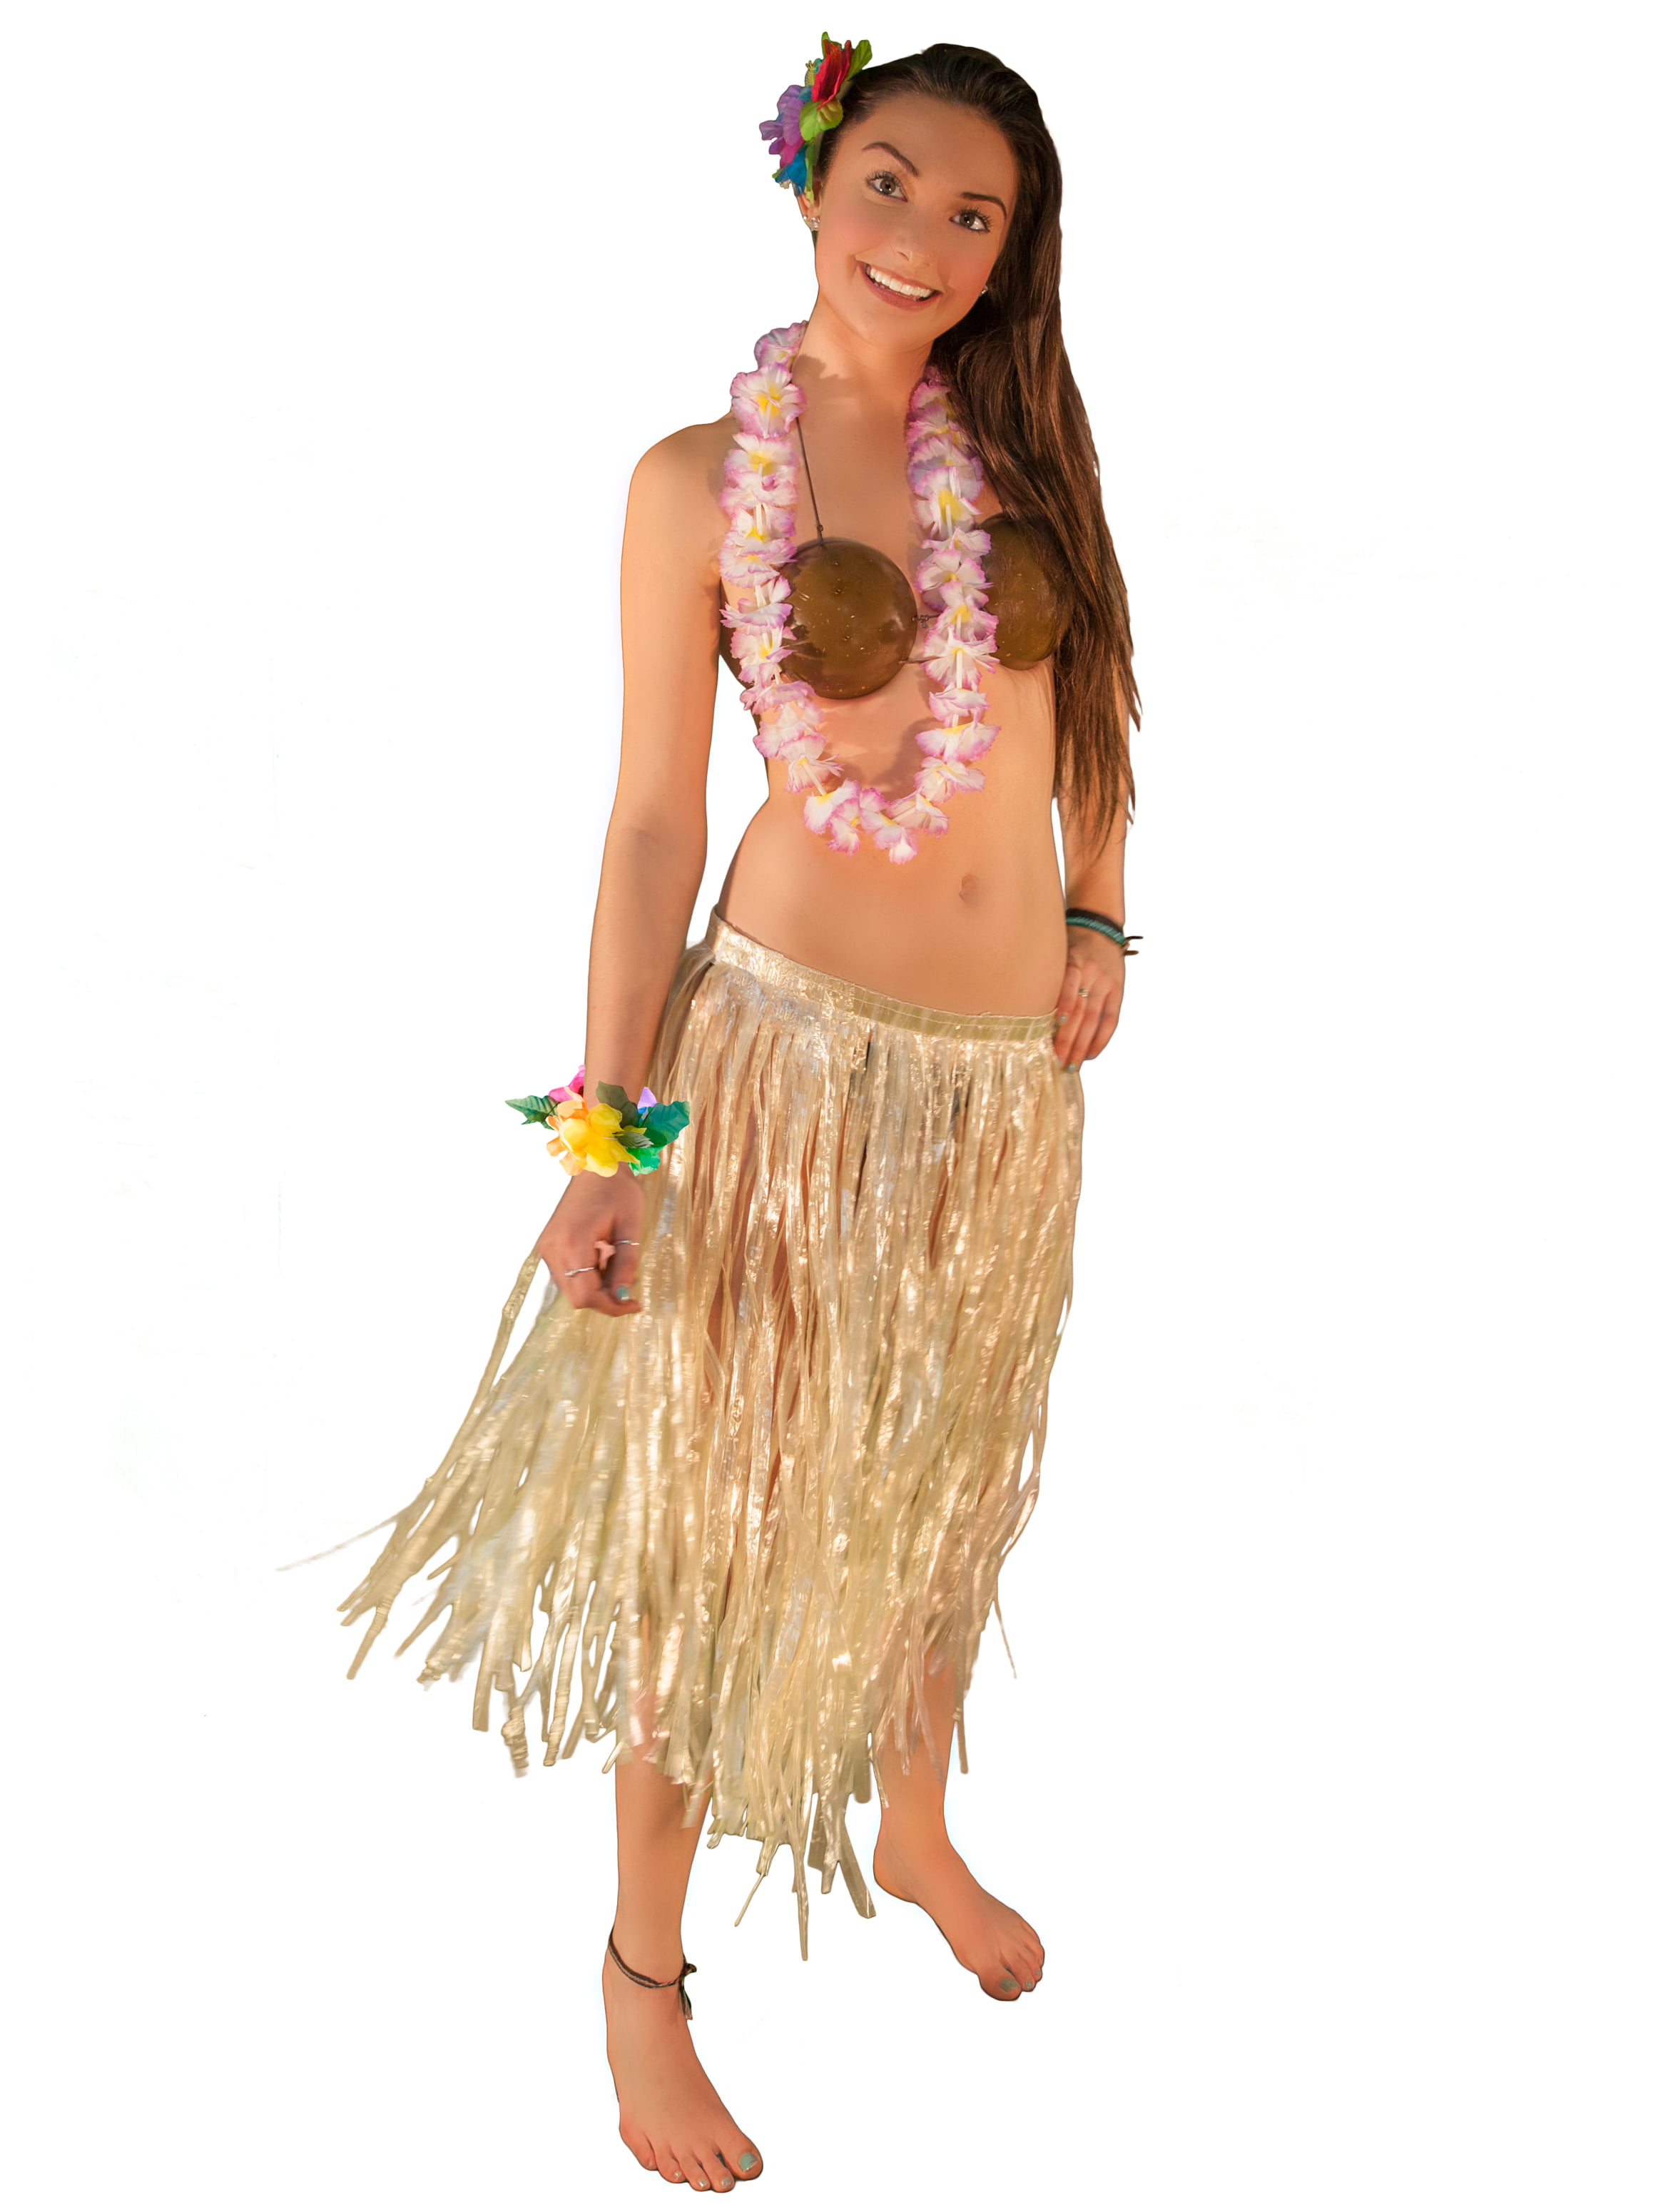 12 Set Luau Skirt Hawaiian Hula Grass Skirt with Flower Leis Necklace Set Luau Party Favors Hawaiian Tropical Party Decorations for Kids and Adults